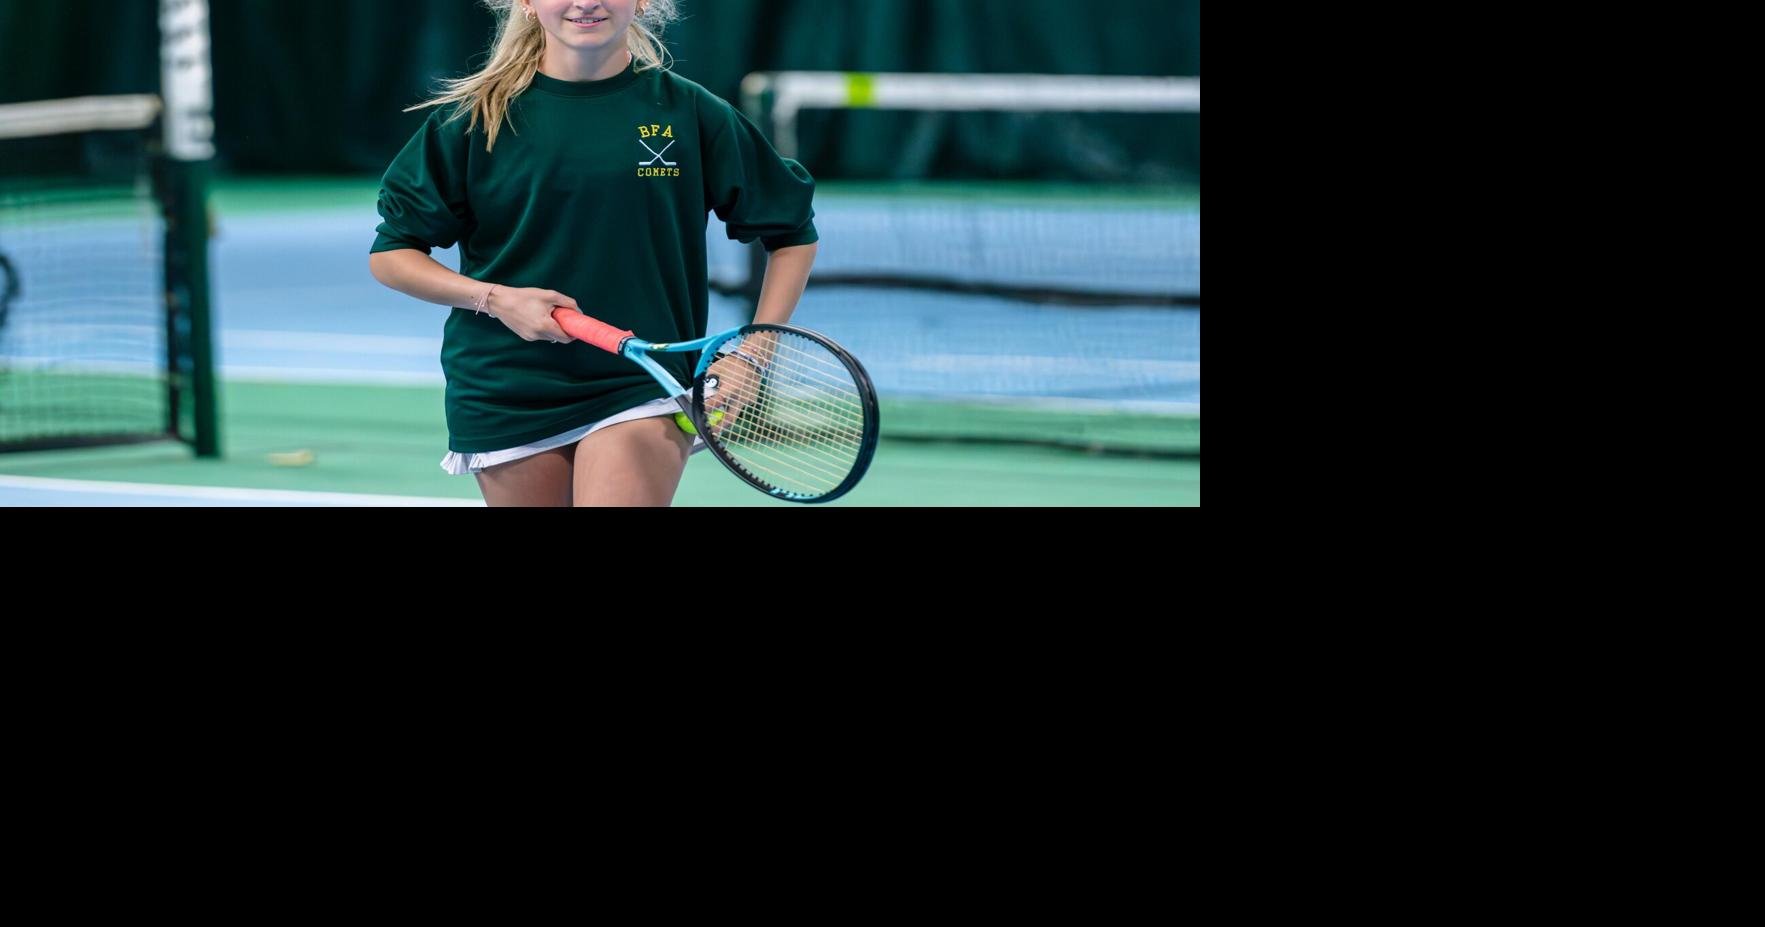 Check out the results from the BFA St Albans Comets tennis team